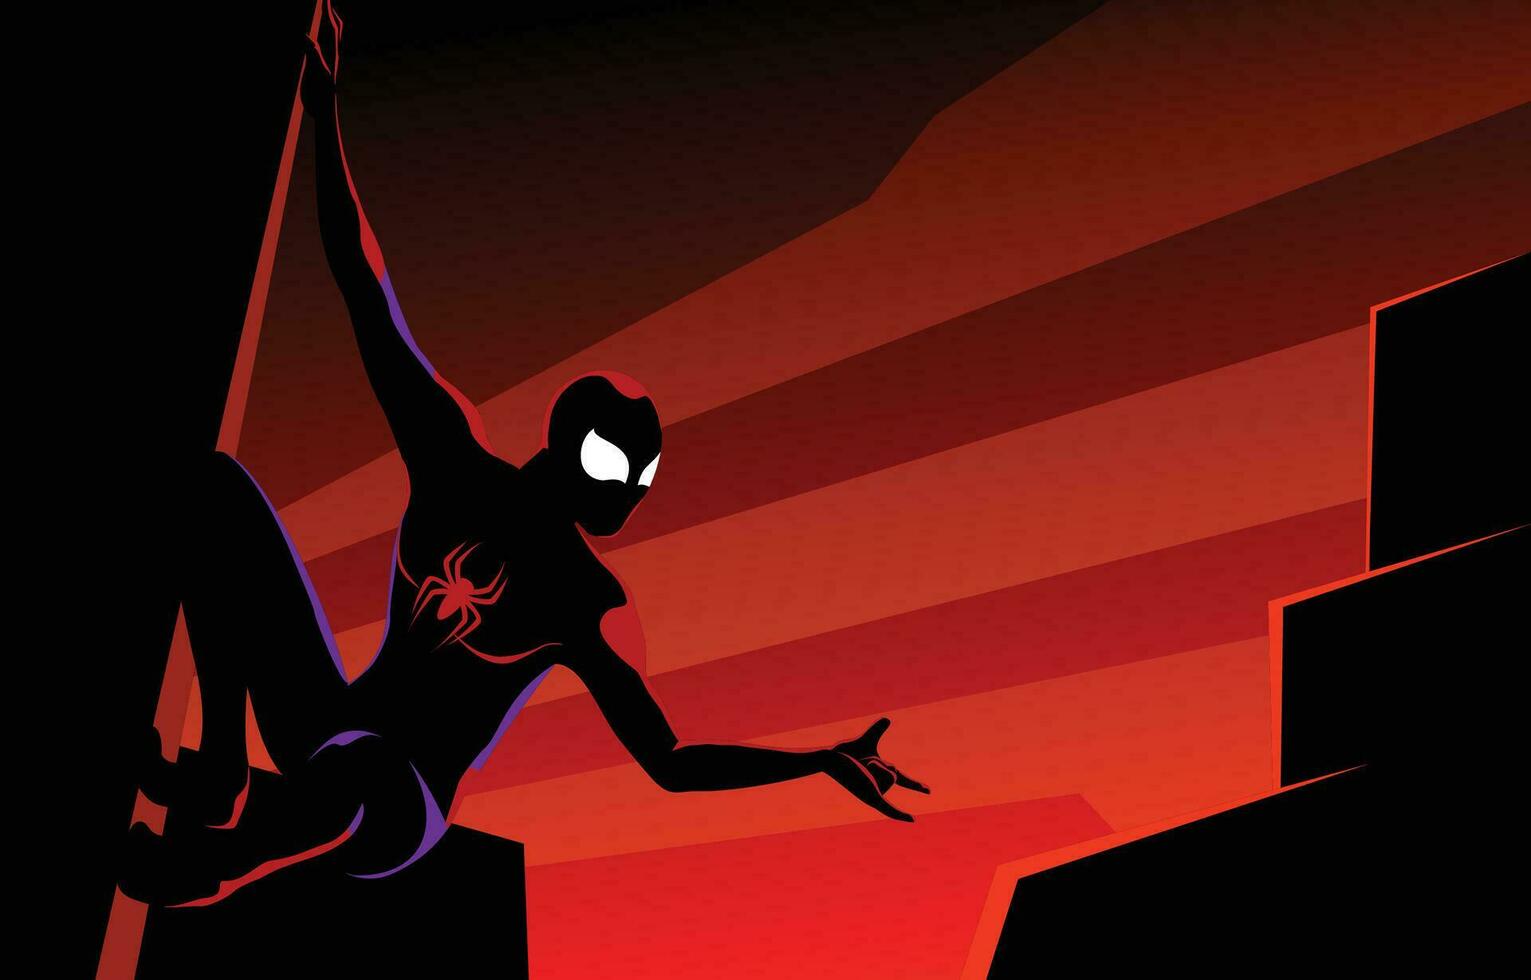 Spider Hero Crawl In The Red Night Background vector